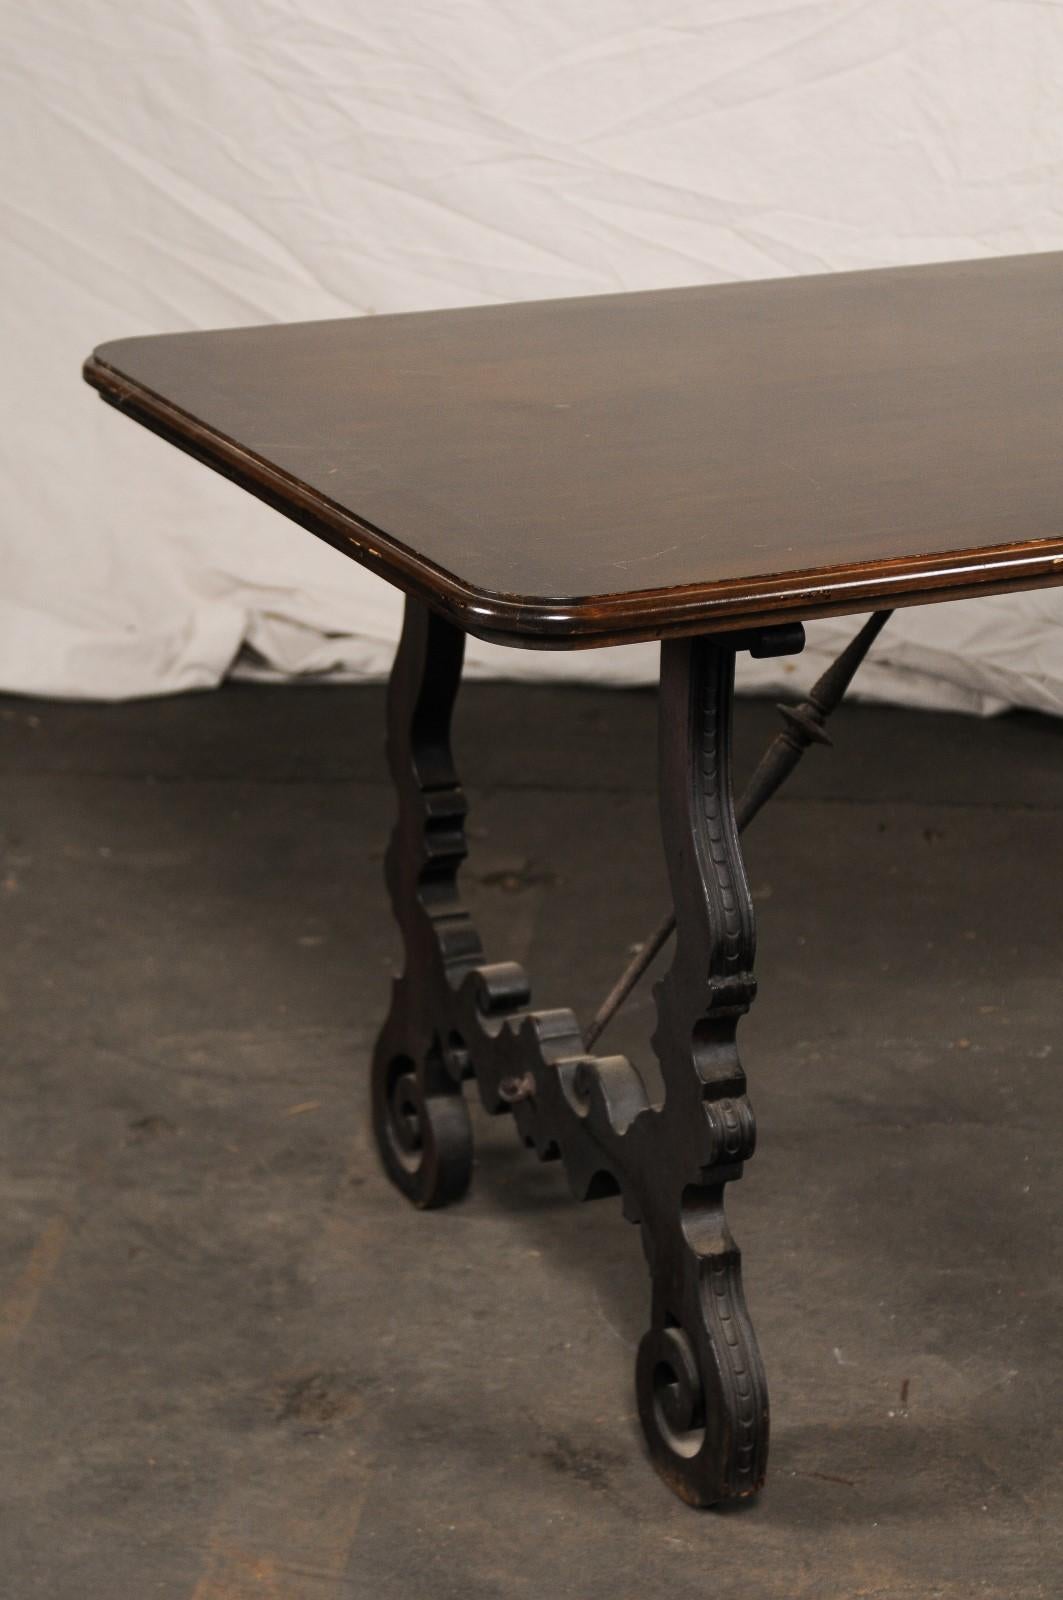 18th-19th Century Spanish Trestle Table with Iron Stretcher In Good Condition For Sale In Atlanta, GA